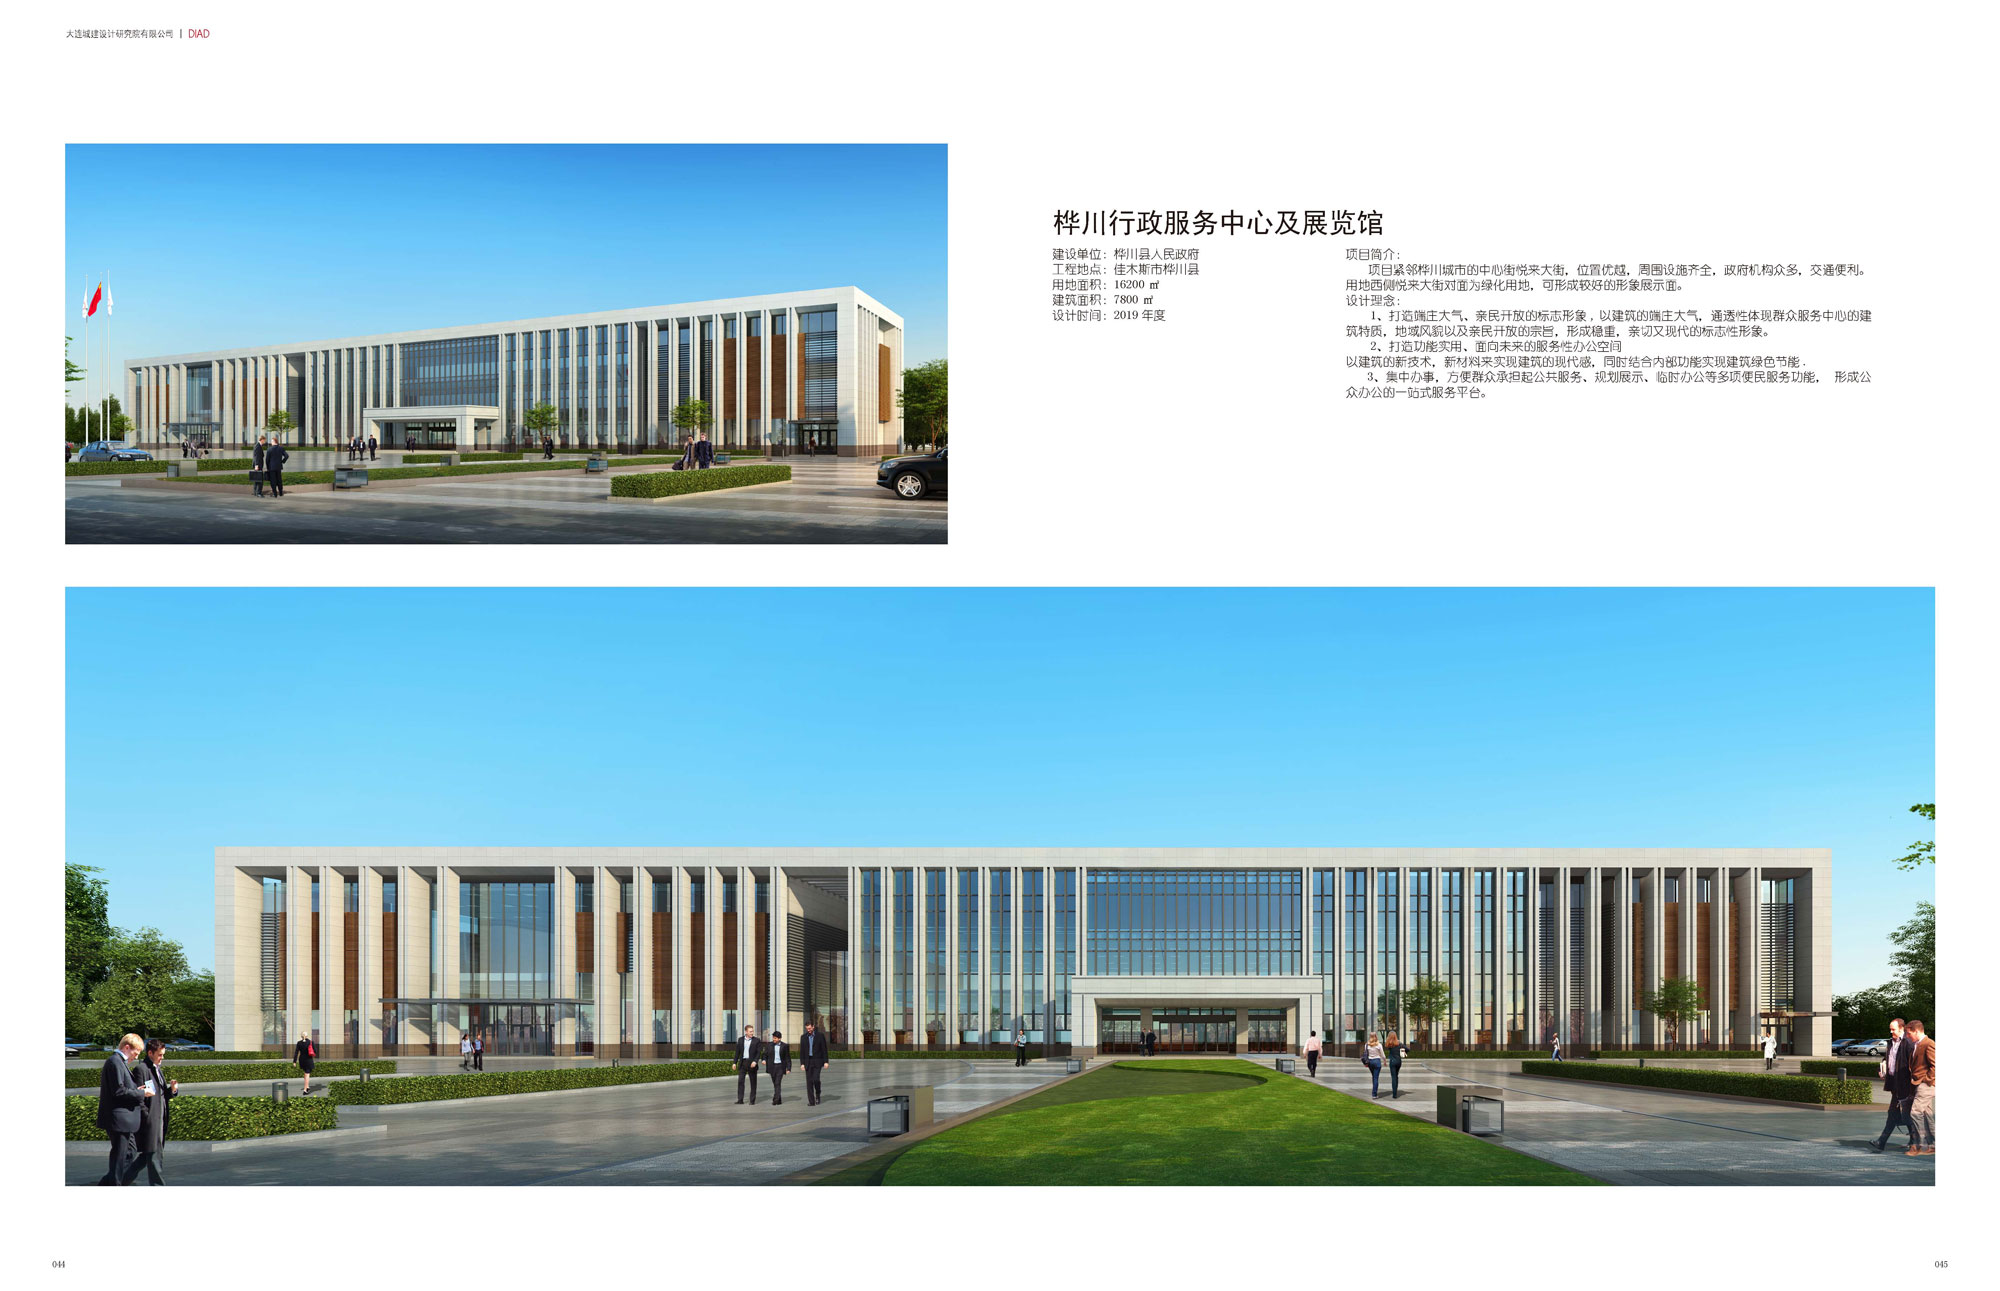 Huachuan Administrative Services Center and Exhibition Building